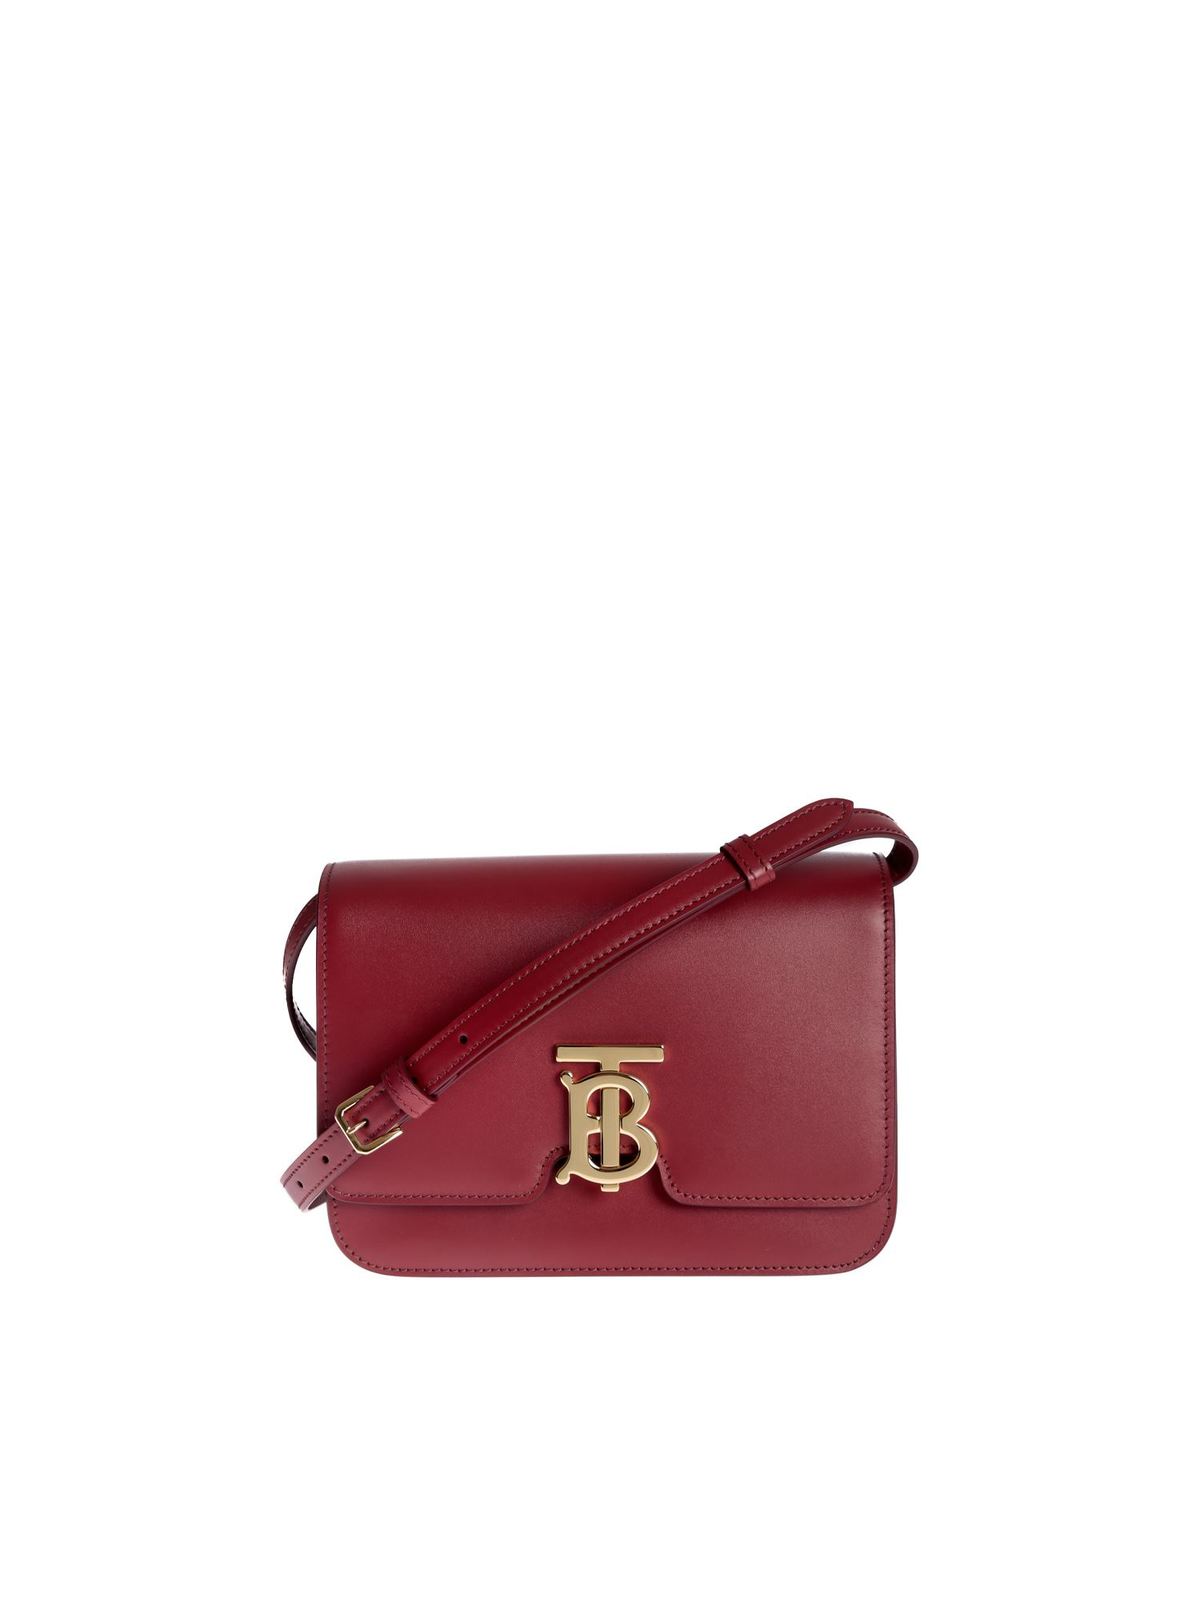 Burberry TB Small Bag Red Grainy Leather